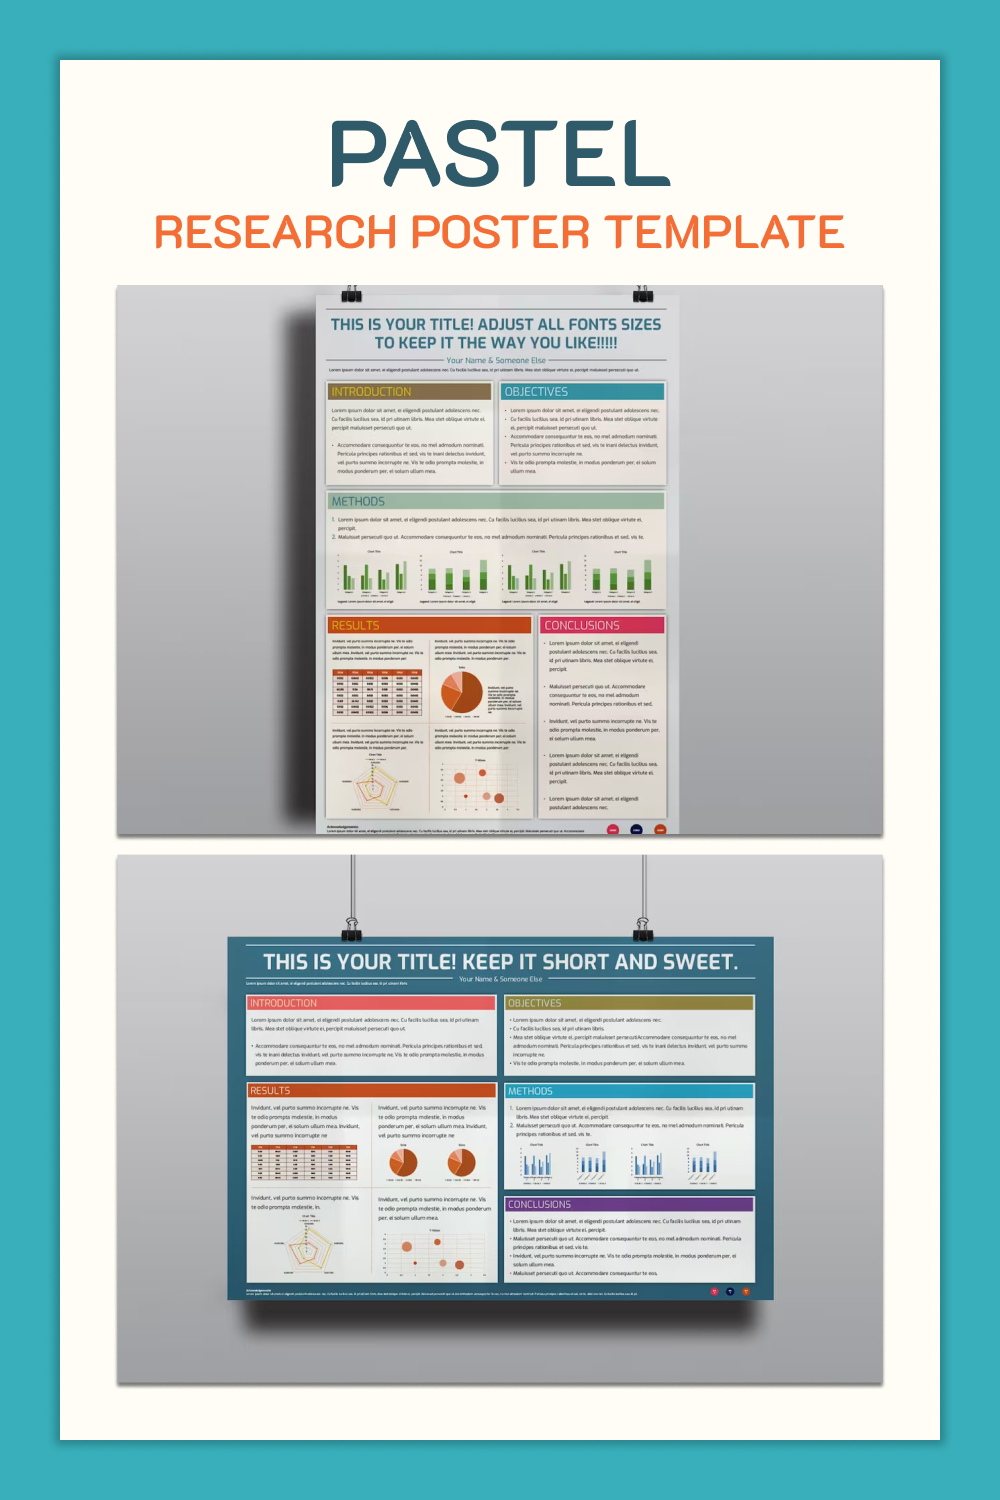 Pinterest of pastel research poster template.